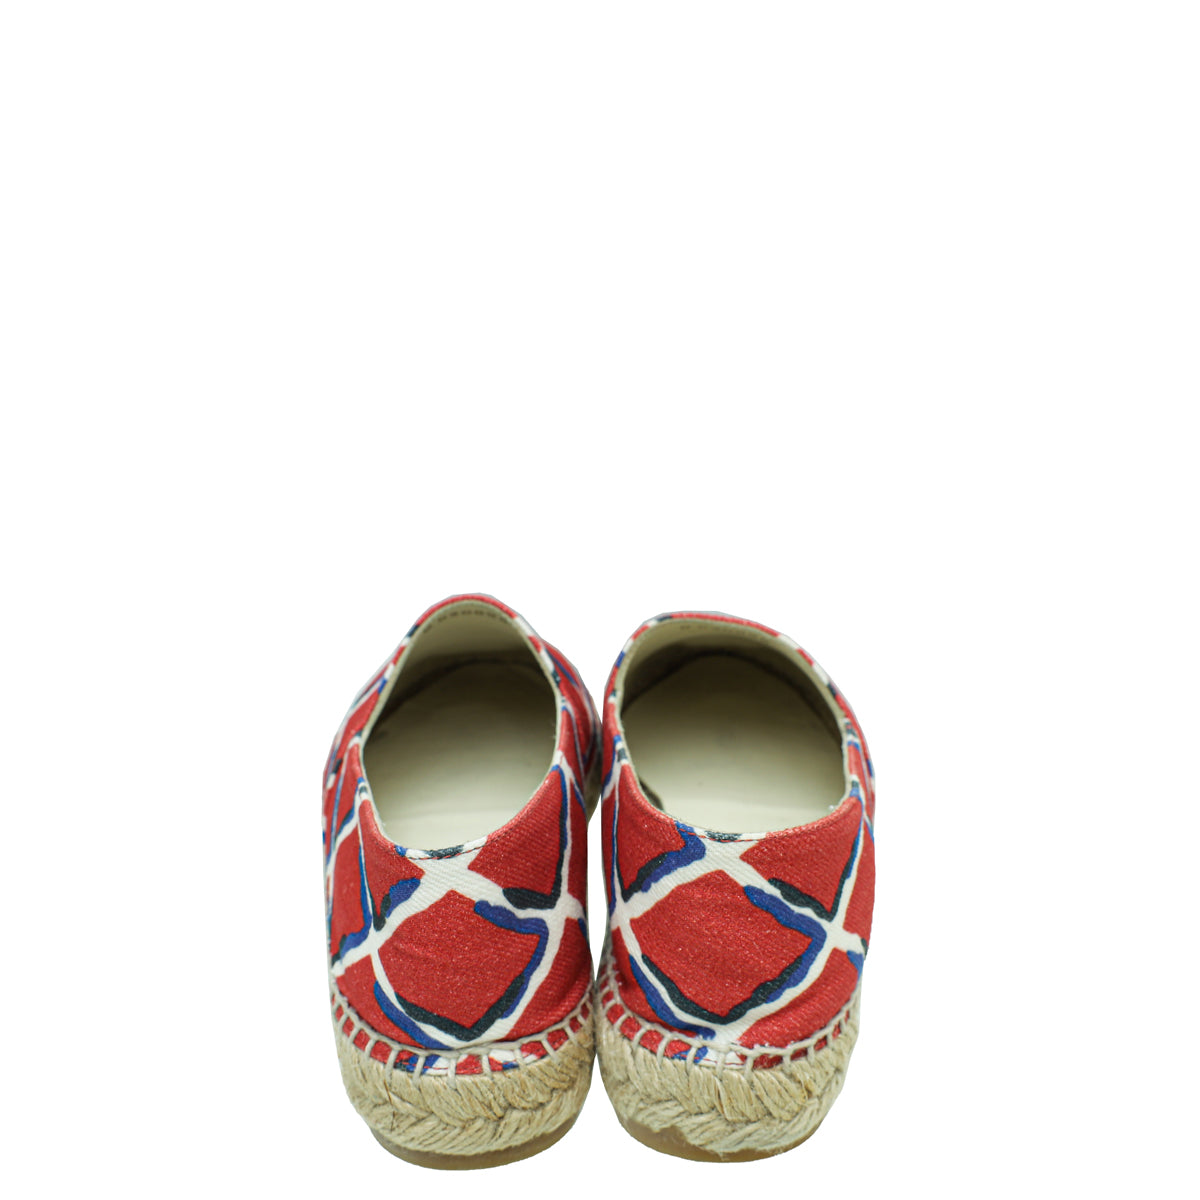 Chanel Multicolor CC Diamond Quilted Print Espadrille Flats 35